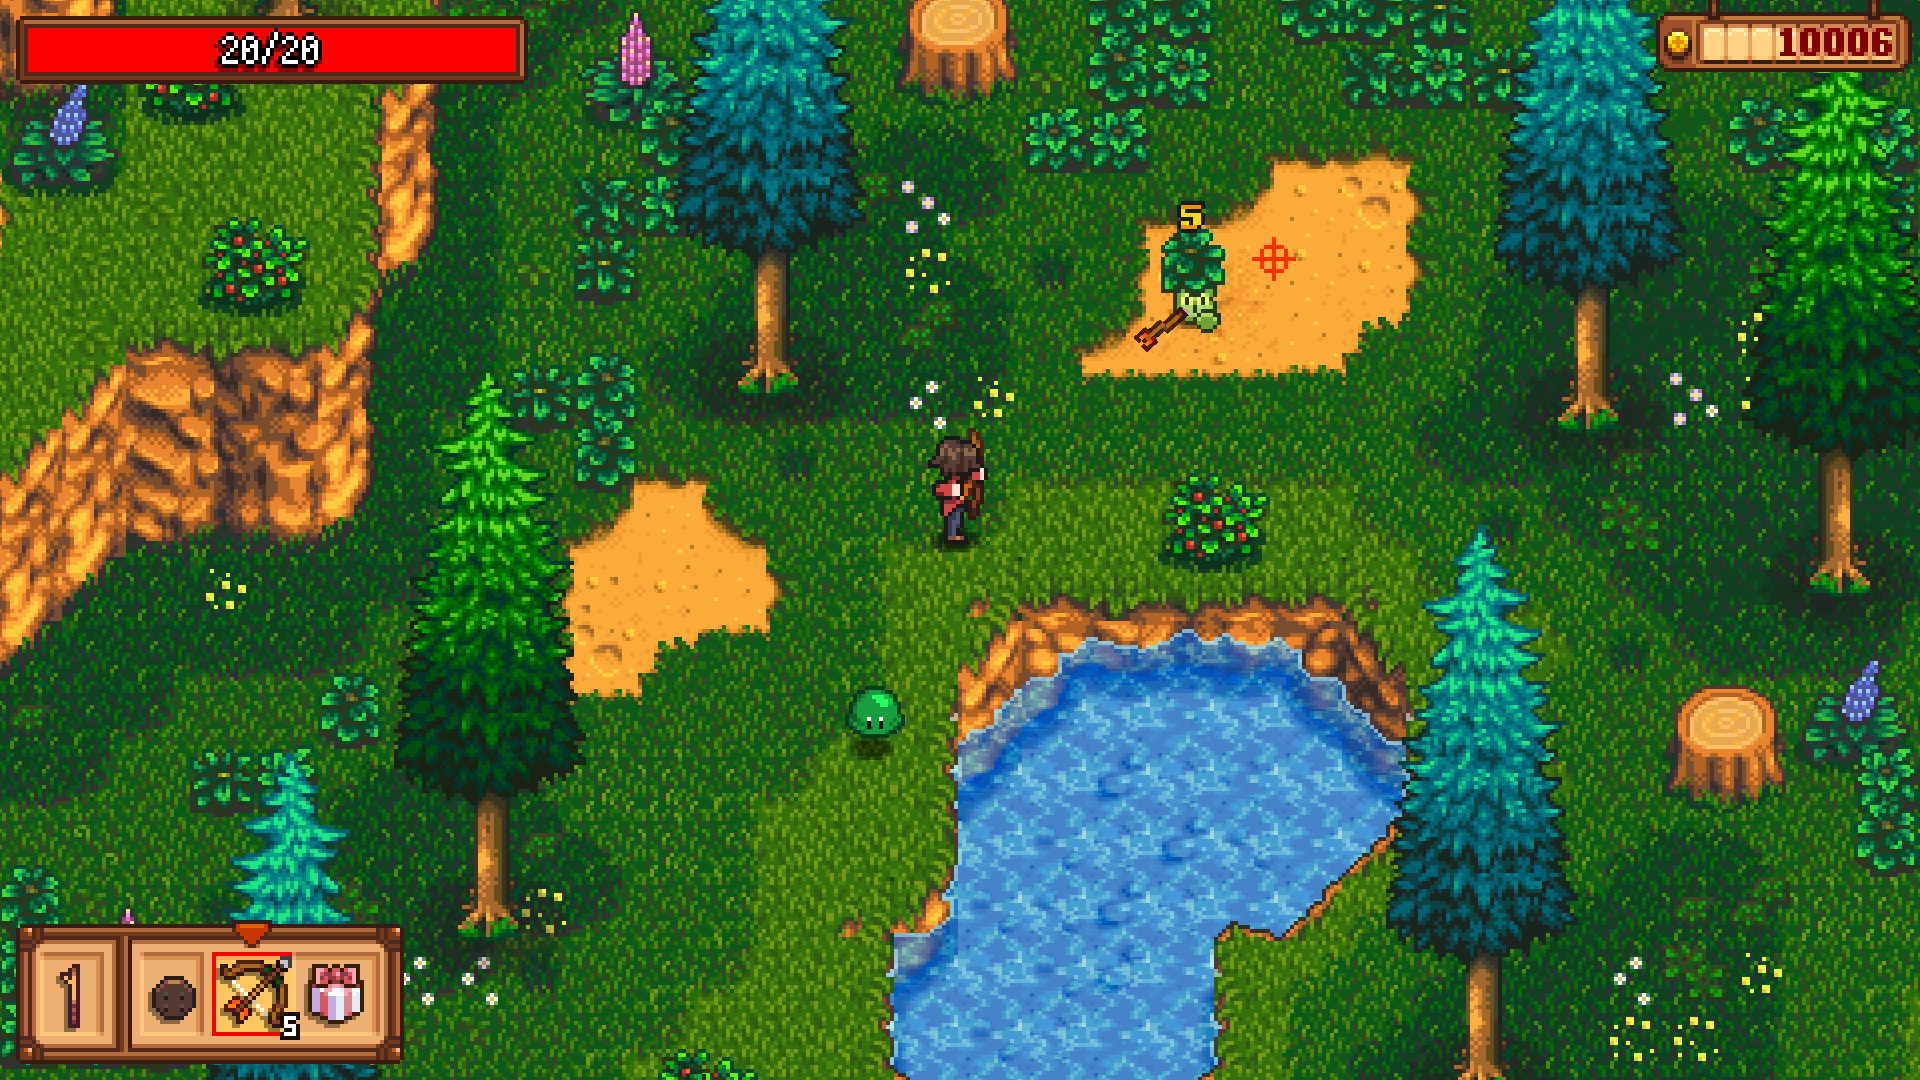 A screenshot from Haunted Chocolatier, showing a figure hunting with a bow in the woods.